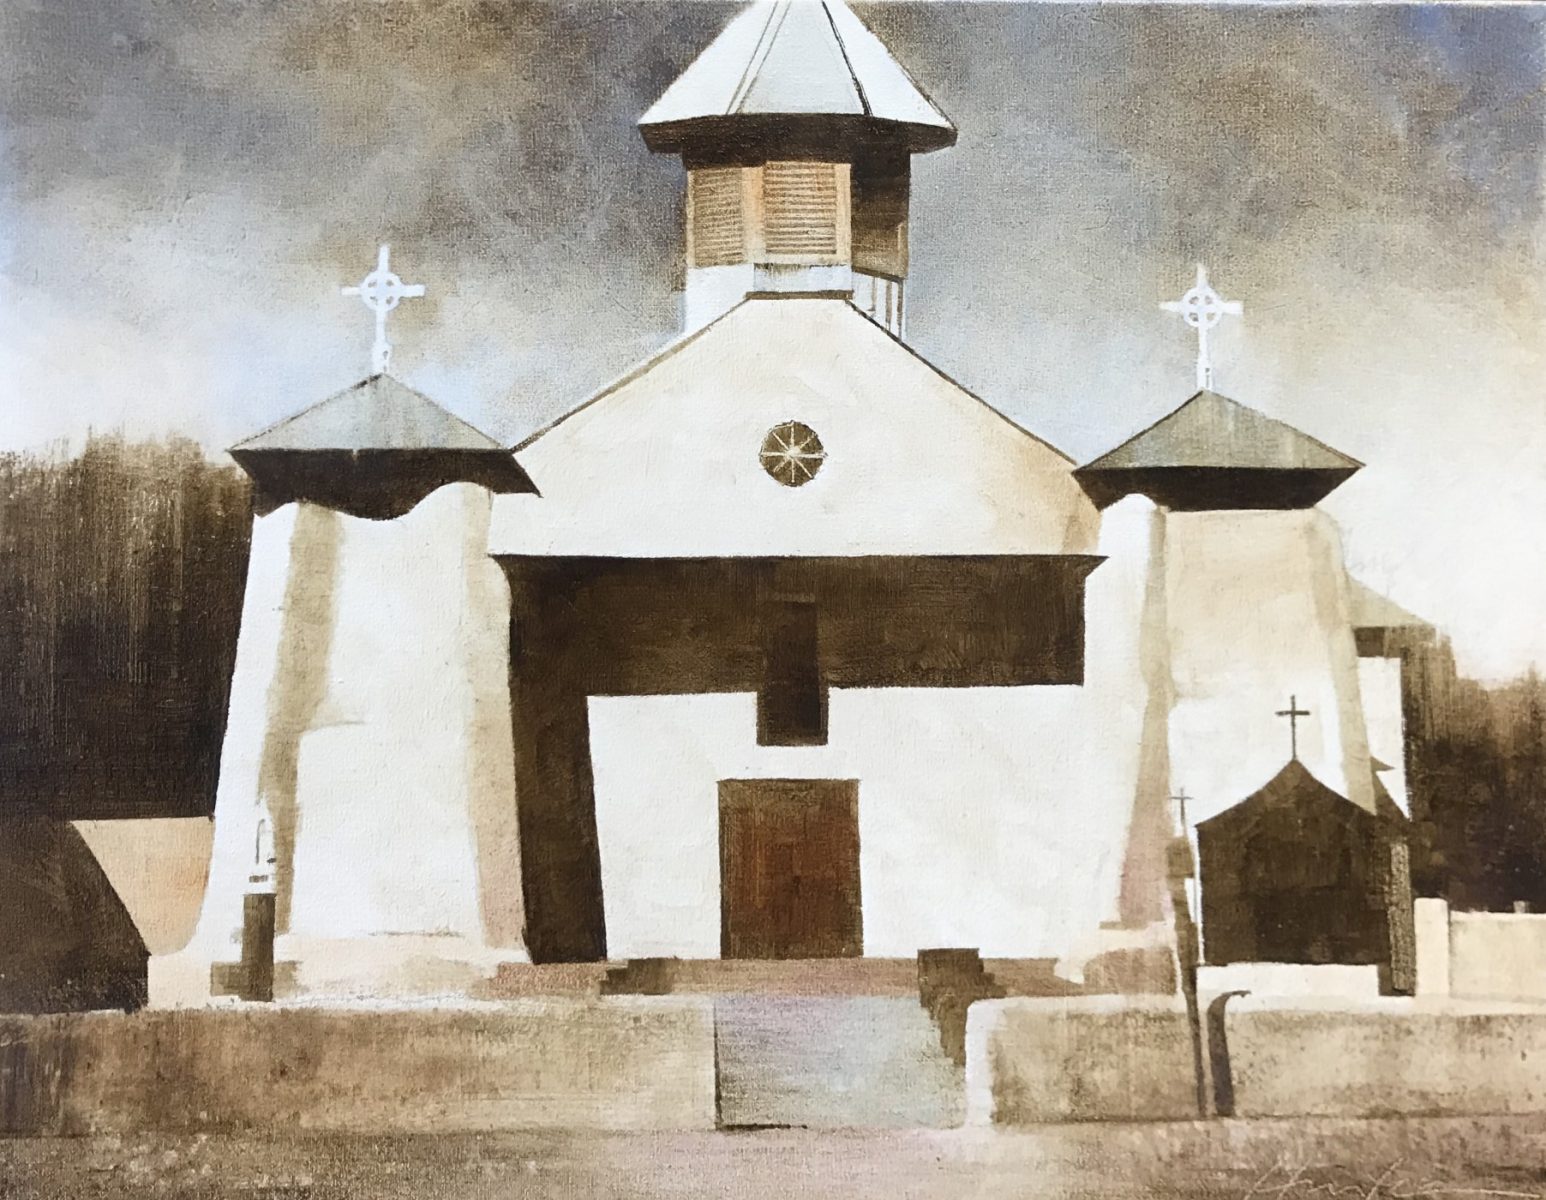 Oil painting of New Mexican church by Charlie Hunter